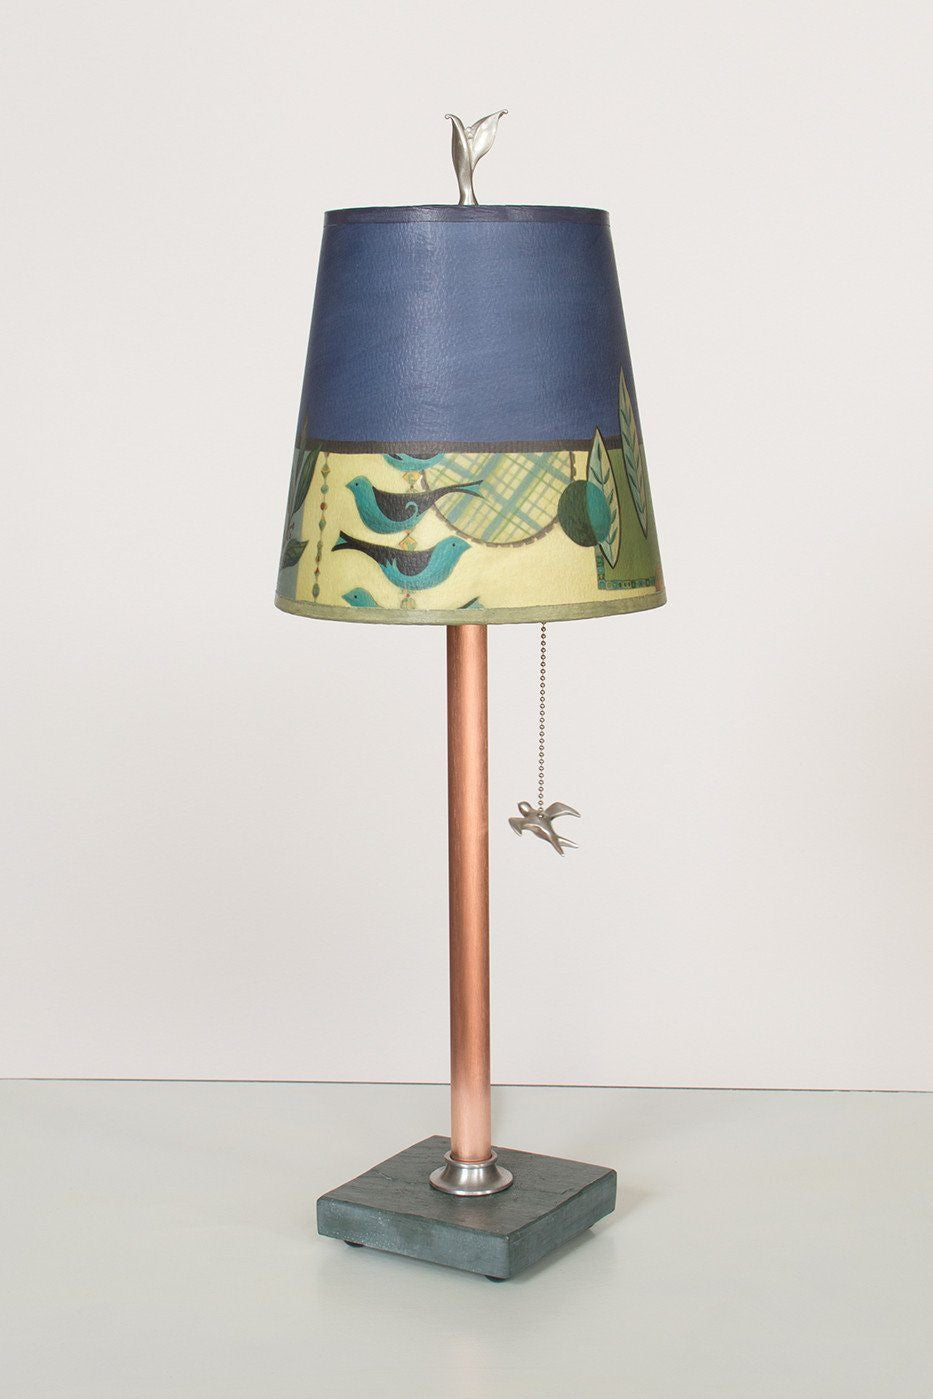 Janna Ugone &amp; Co Table Lamps Copper Table Lamp with Small Drum Shade in New Capri Periwinkle